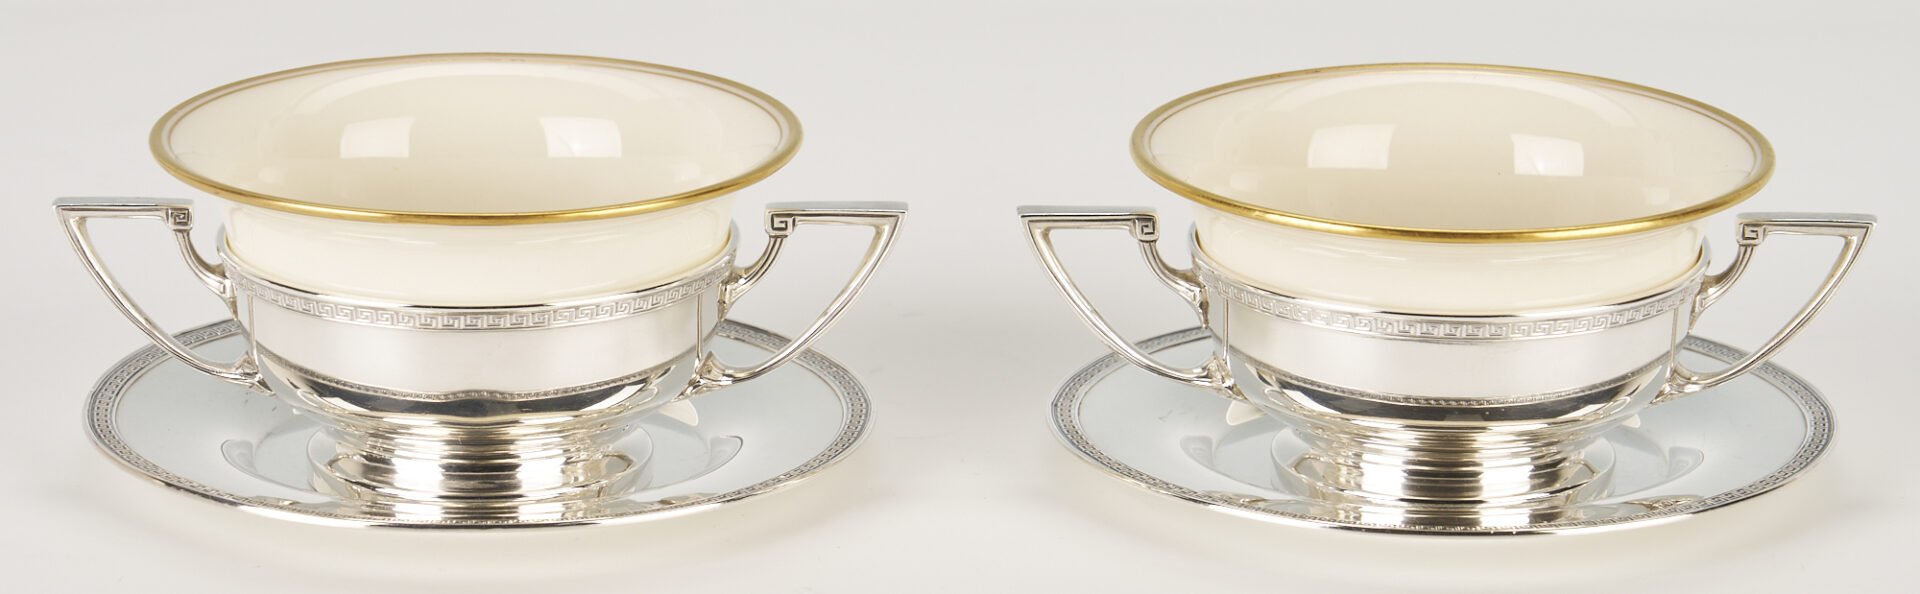 Lot 287: 12 Gorham Sterling Silver and Lenox Porcelain Soup Cups and Underplates